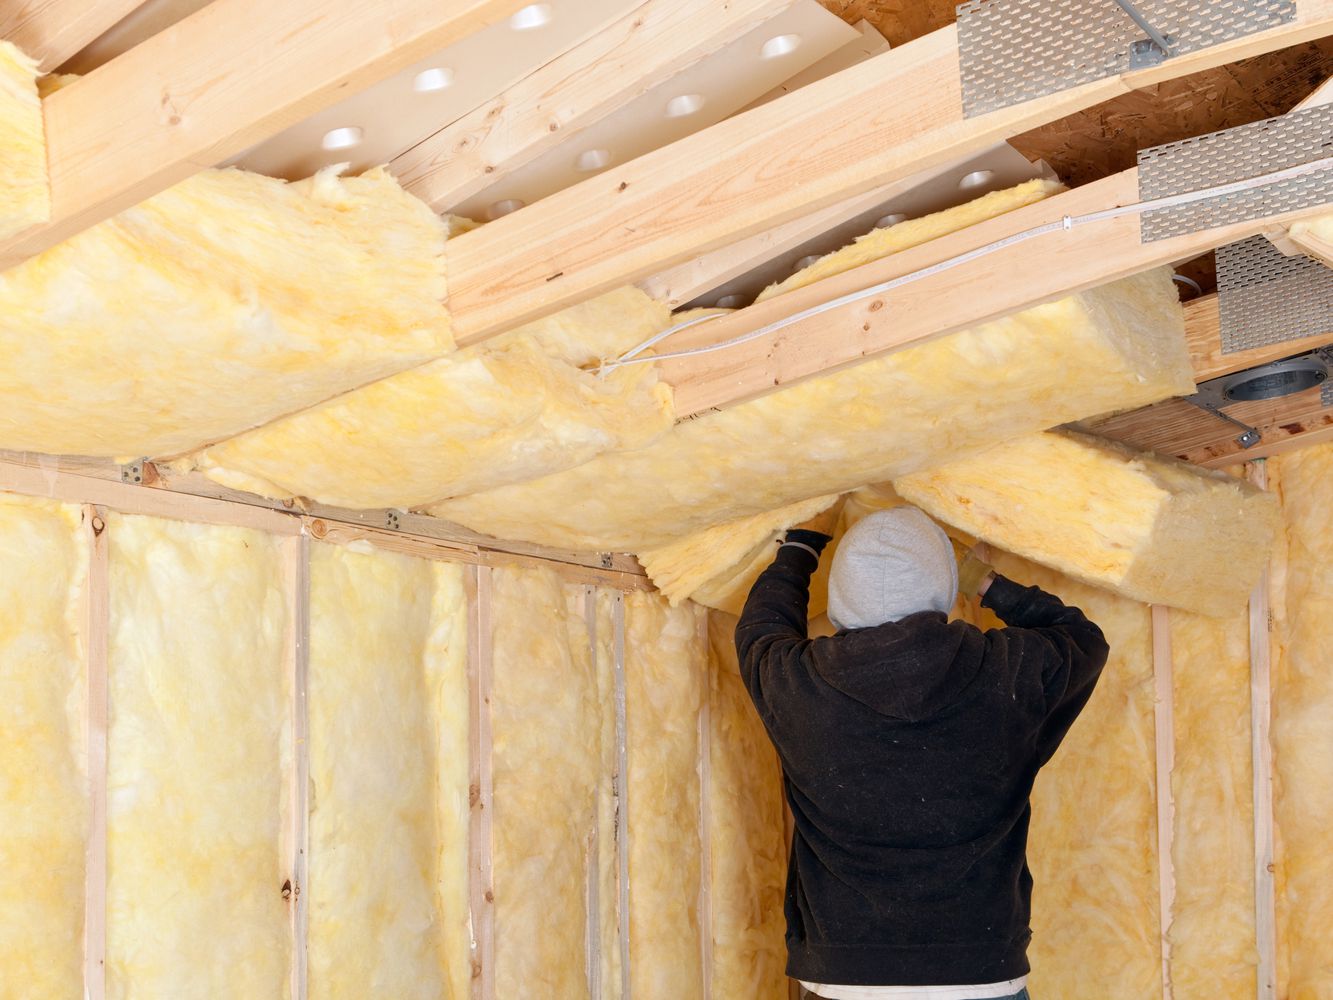 A man installing faced insulation batts in a room.